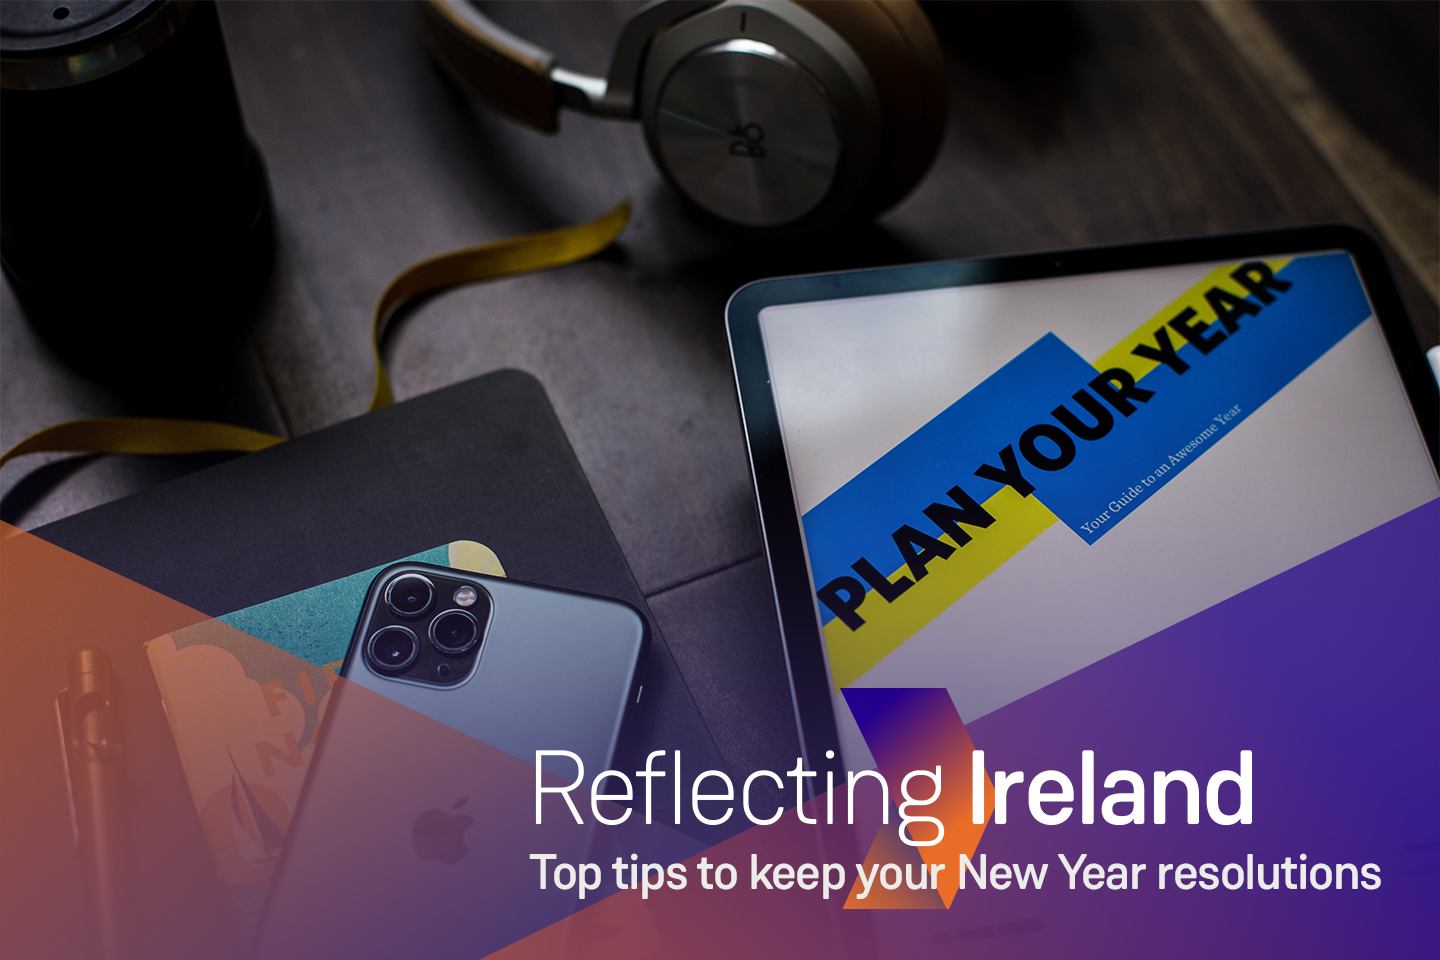 Reflecting Ireland: Top tips to keep your New Year resolutions